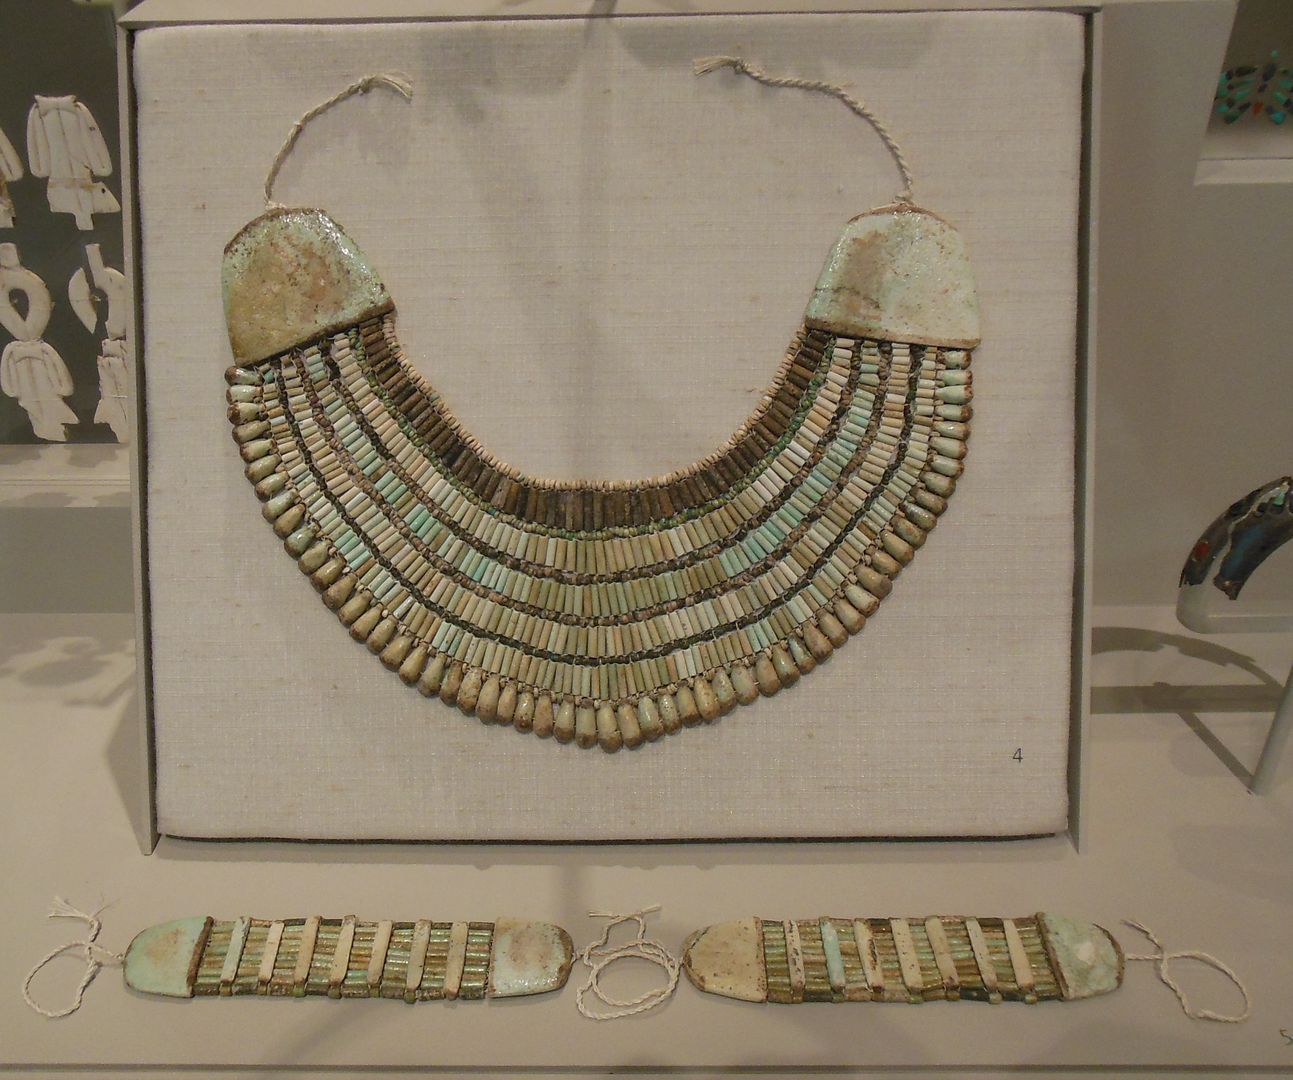 Ancient Egypt in Boston: Grave Goods (Photo Diary)